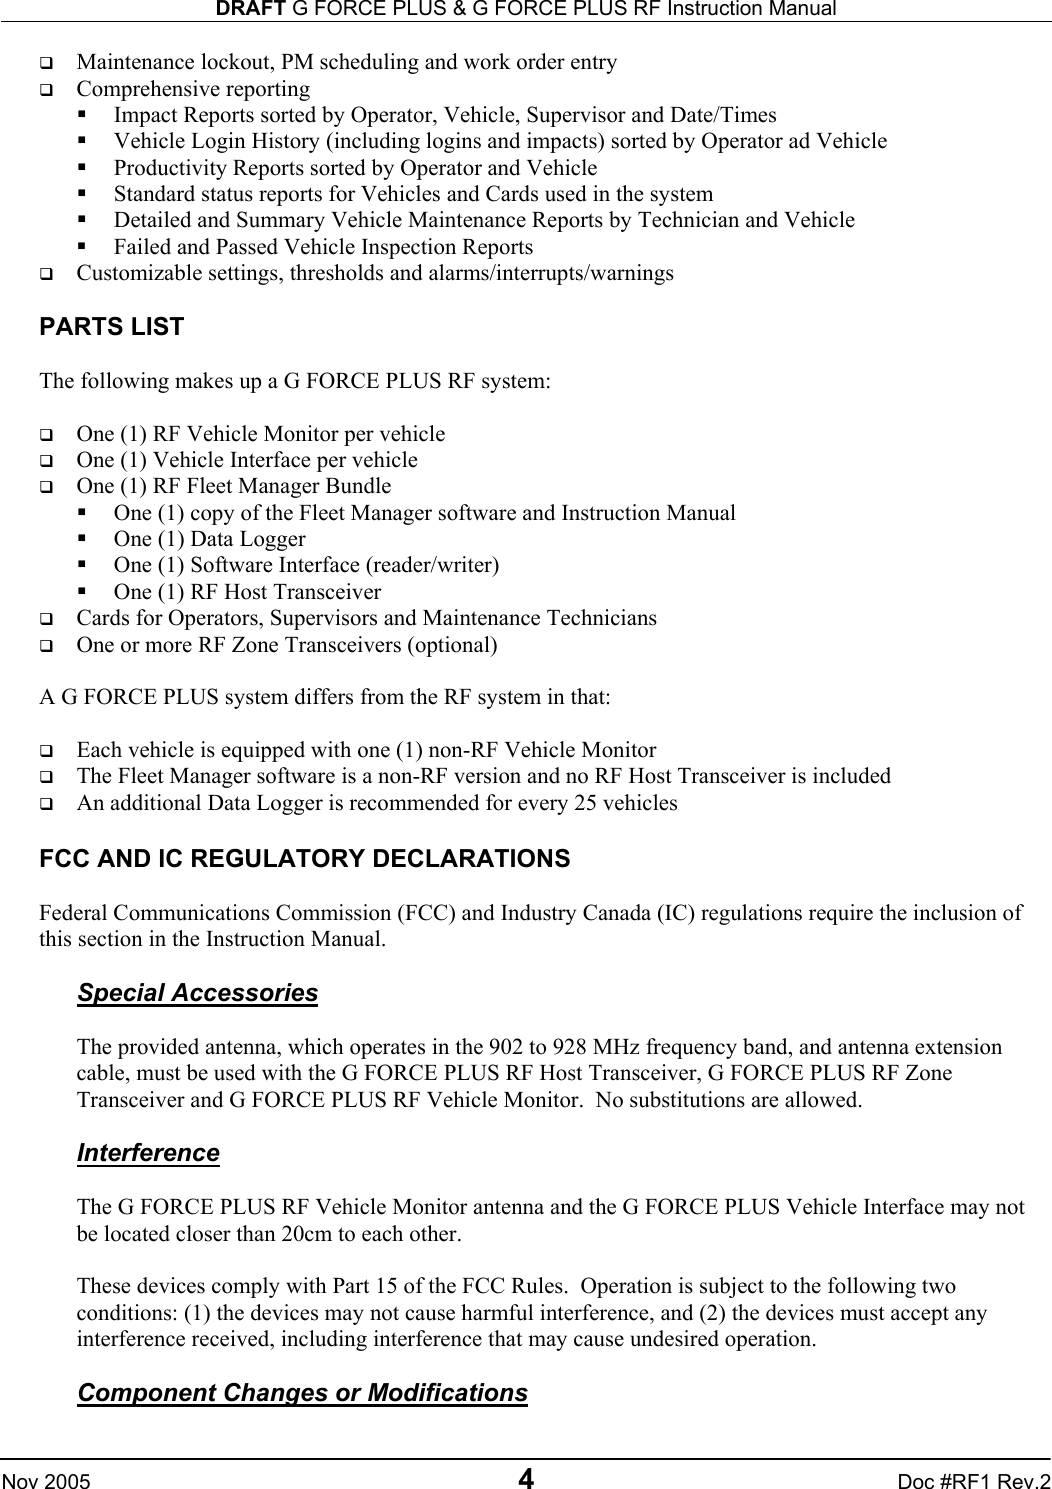 DRAFT G FORCE PLUS &amp; G FORCE PLUS RF Instruction Manual   Nov 2005 4 Doc #RF1 Rev.2   Maintenance lockout, PM scheduling and work order entry   Comprehensive reporting   Impact Reports sorted by Operator, Vehicle, Supervisor and Date/Times   Vehicle Login History (including logins and impacts) sorted by Operator ad Vehicle   Productivity Reports sorted by Operator and Vehicle   Standard status reports for Vehicles and Cards used in the system   Detailed and Summary Vehicle Maintenance Reports by Technician and Vehicle   Failed and Passed Vehicle Inspection Reports   Customizable settings, thresholds and alarms/interrupts/warnings  PARTS LIST  The following makes up a G FORCE PLUS RF system:       One (1) RF Vehicle Monitor per vehicle   One (1) Vehicle Interface per vehicle   One (1) RF Fleet Manager Bundle   One (1) copy of the Fleet Manager software and Instruction Manual   One (1) Data Logger   One (1) Software Interface (reader/writer)   One (1) RF Host Transceiver   Cards for Operators, Supervisors and Maintenance Technicians   One or more RF Zone Transceivers (optional)  A G FORCE PLUS system differs from the RF system in that:    Each vehicle is equipped with one (1) non-RF Vehicle Monitor   The Fleet Manager software is a non-RF version and no RF Host Transceiver is included   An additional Data Logger is recommended for every 25 vehicles  FCC AND IC REGULATORY DECLARATIONS  Federal Communications Commission (FCC) and Industry Canada (IC) regulations require the inclusion of this section in the Instruction Manual.  Special Accessories  The provided antenna, which operates in the 902 to 928 MHz frequency band, and antenna extension cable, must be used with the G FORCE PLUS RF Host Transceiver, G FORCE PLUS RF Zone Transceiver and G FORCE PLUS RF Vehicle Monitor.  No substitutions are allowed.    Interference  The G FORCE PLUS RF Vehicle Monitor antenna and the G FORCE PLUS Vehicle Interface may not be located closer than 20cm to each other.  These devices comply with Part 15 of the FCC Rules.  Operation is subject to the following two conditions: (1) the devices may not cause harmful interference, and (2) the devices must accept any interference received, including interference that may cause undesired operation.  Component Changes or Modifications  